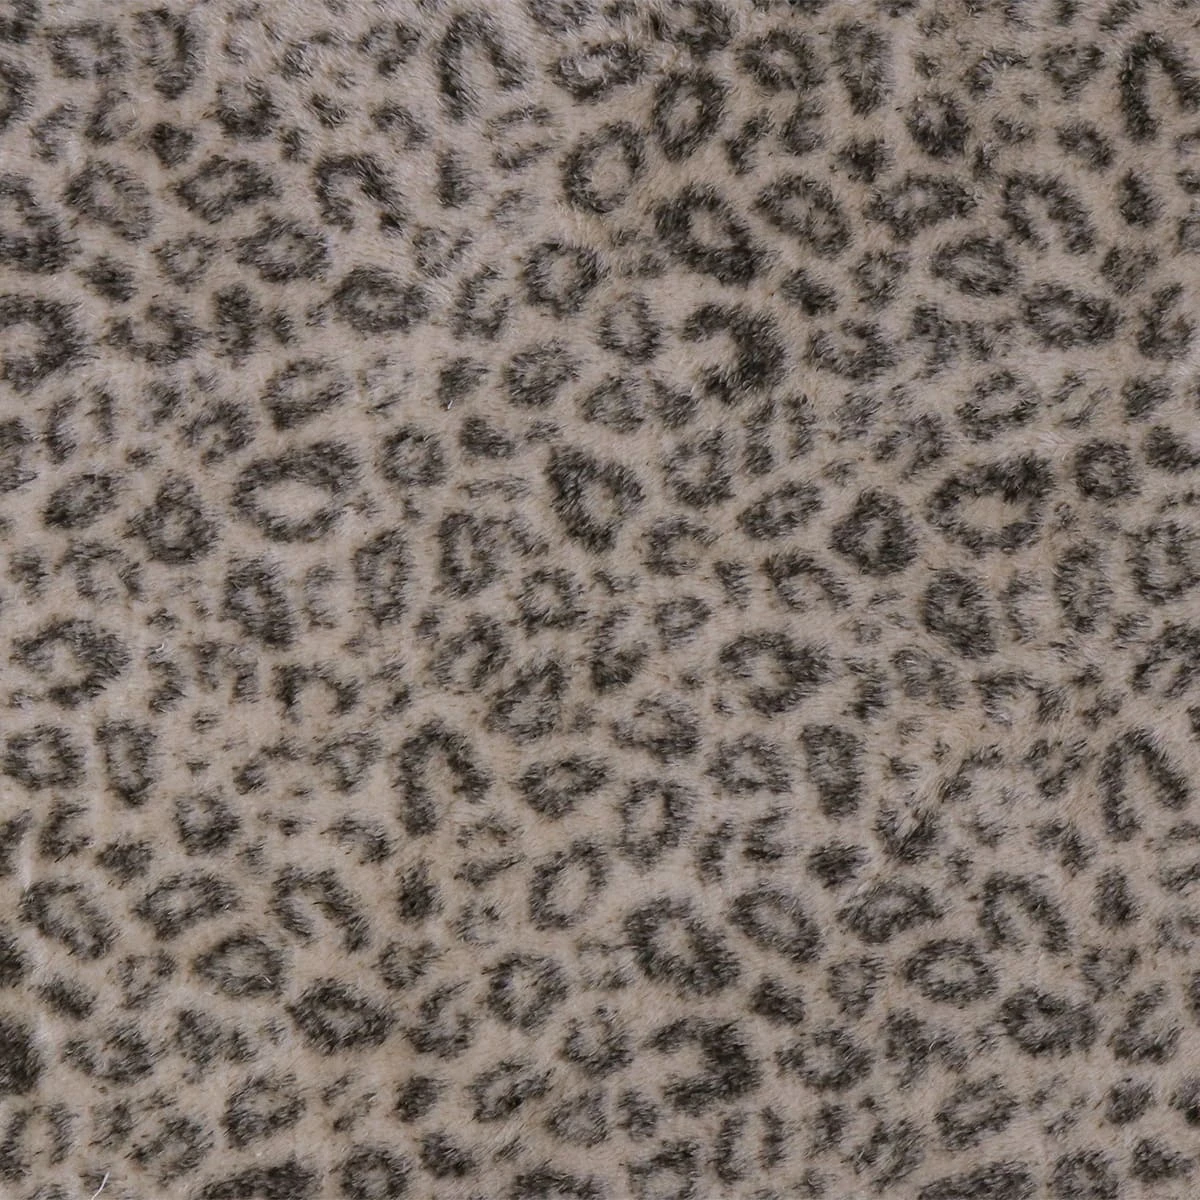 Leopard Frosted Printed Plush Blanket (Brown)